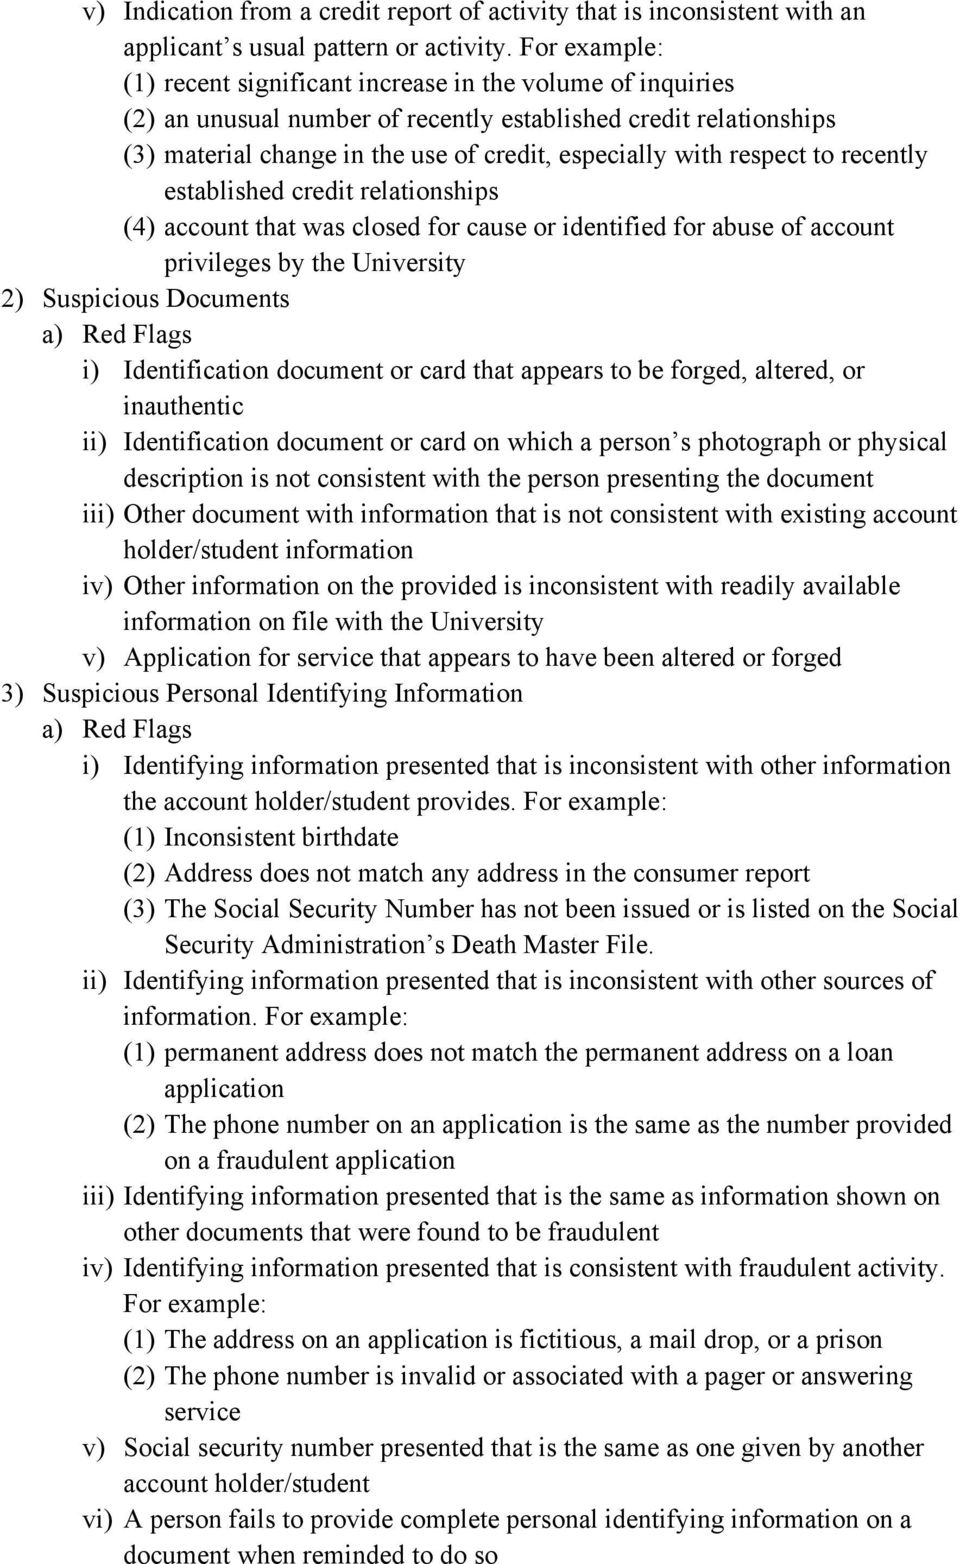 respect to recently established credit relationships (4) account that was closed for cause or identified for abuse of account privileges by the University 2) Suspicious Documents i) Identification